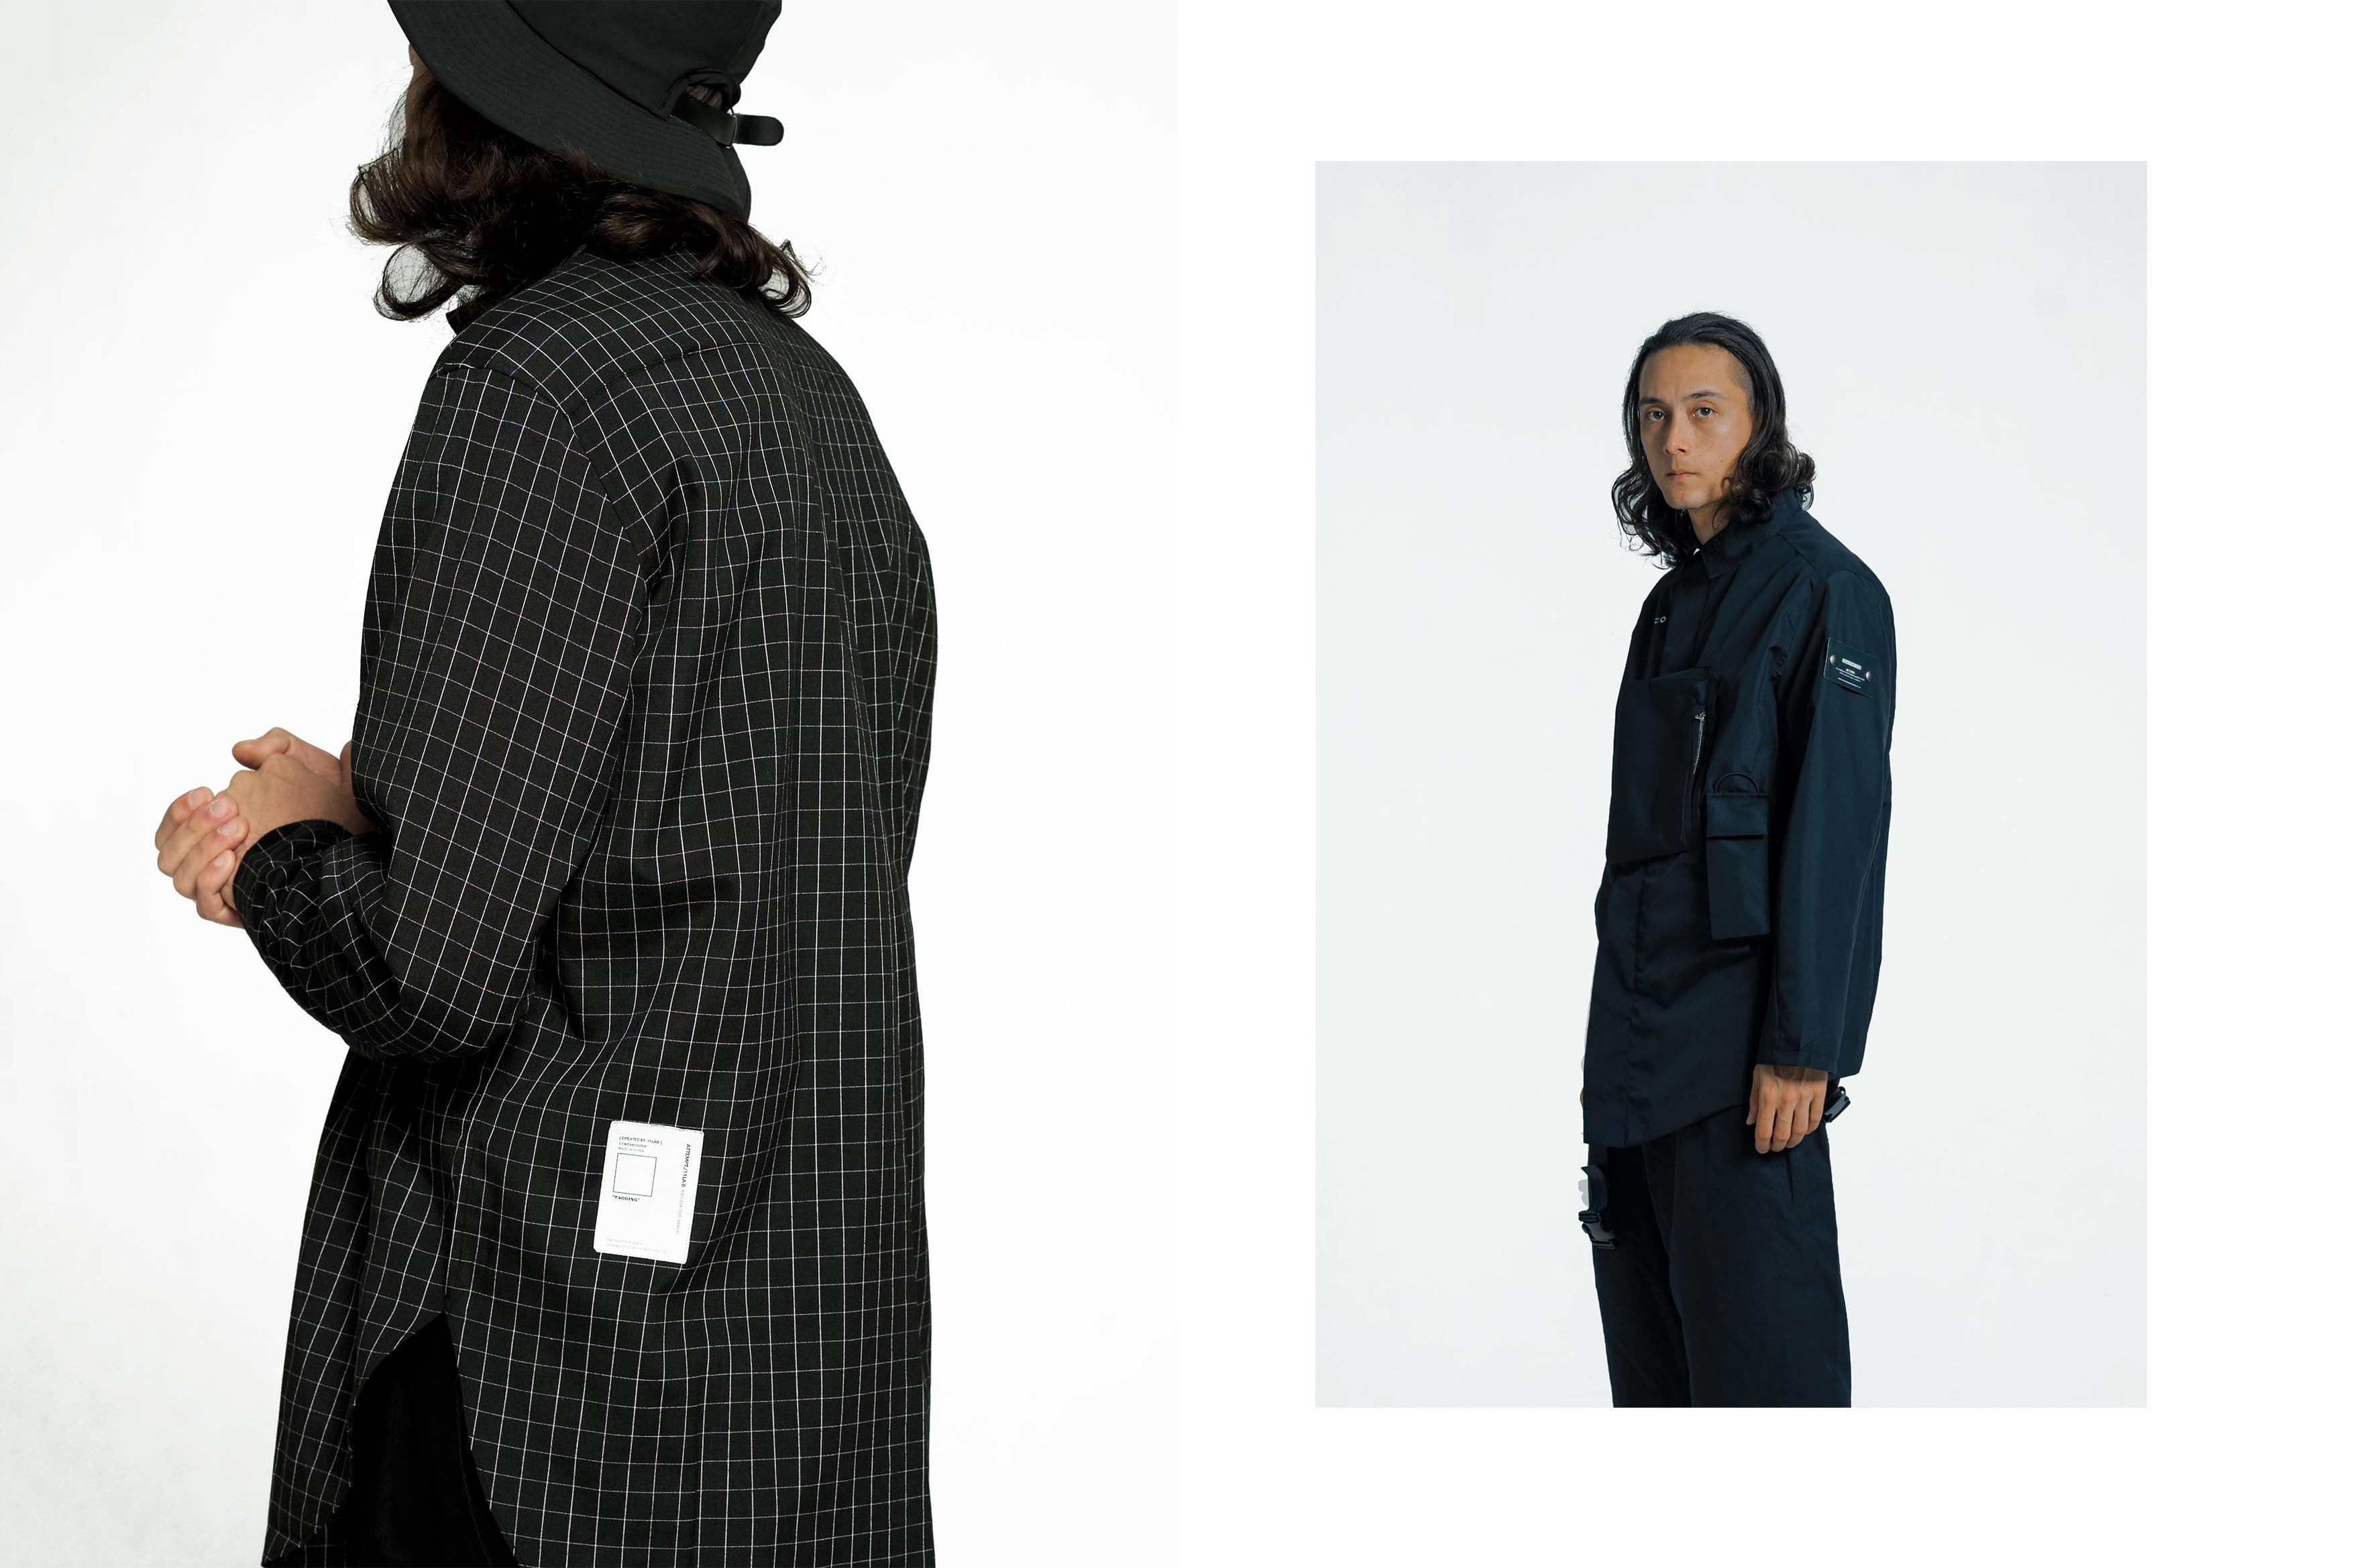 ATTEMPET 2016 Fall/Winter "The Man In A Case" Lookbook